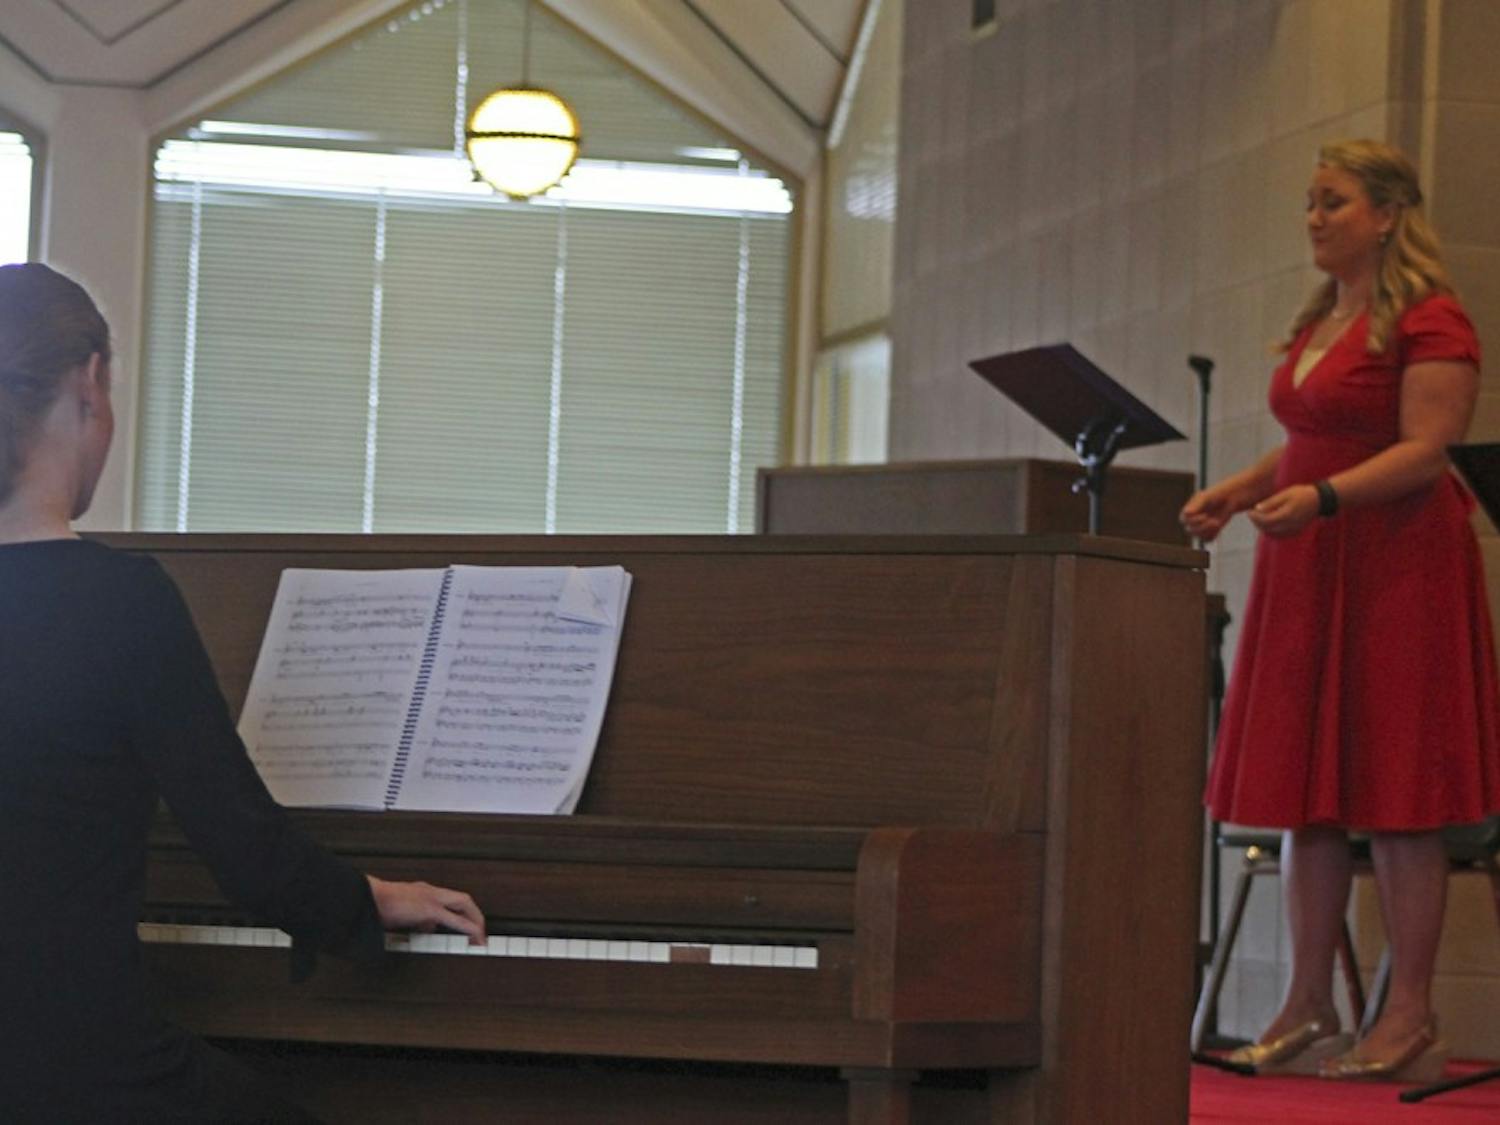 Julia Carey (left) plays piano for "The Body Politic" as Kristin Schwecke (right) performs the role of Constance.